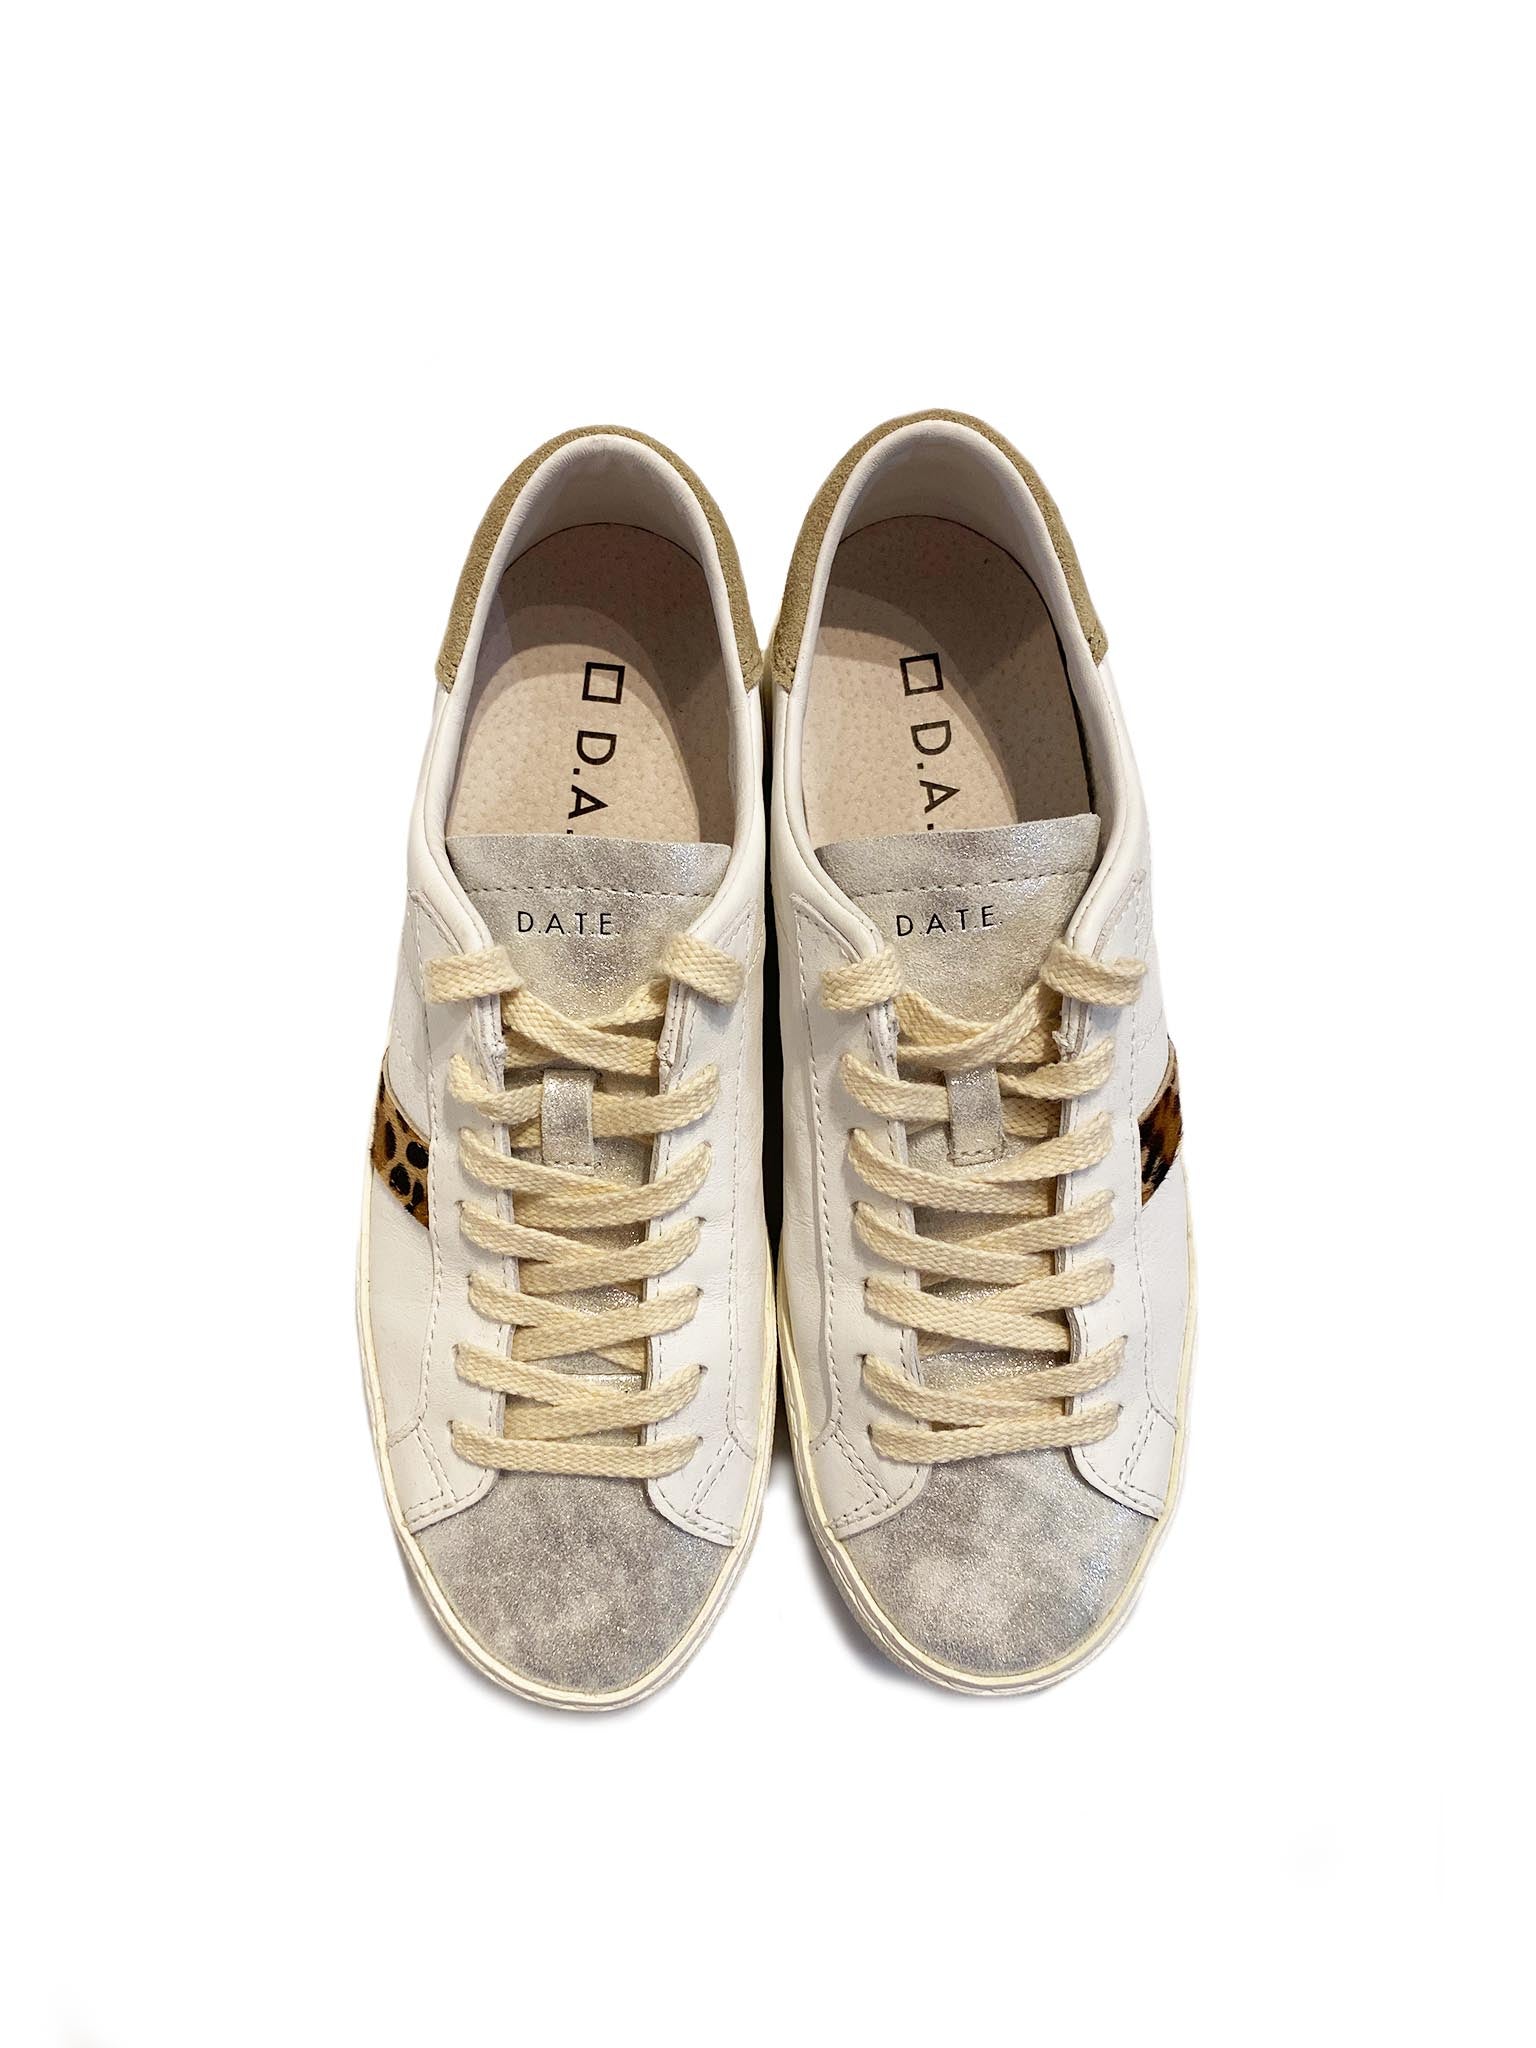 D.A.T.E Hill Low Vintage Calf White Leopard Trainers Cutout from Top view